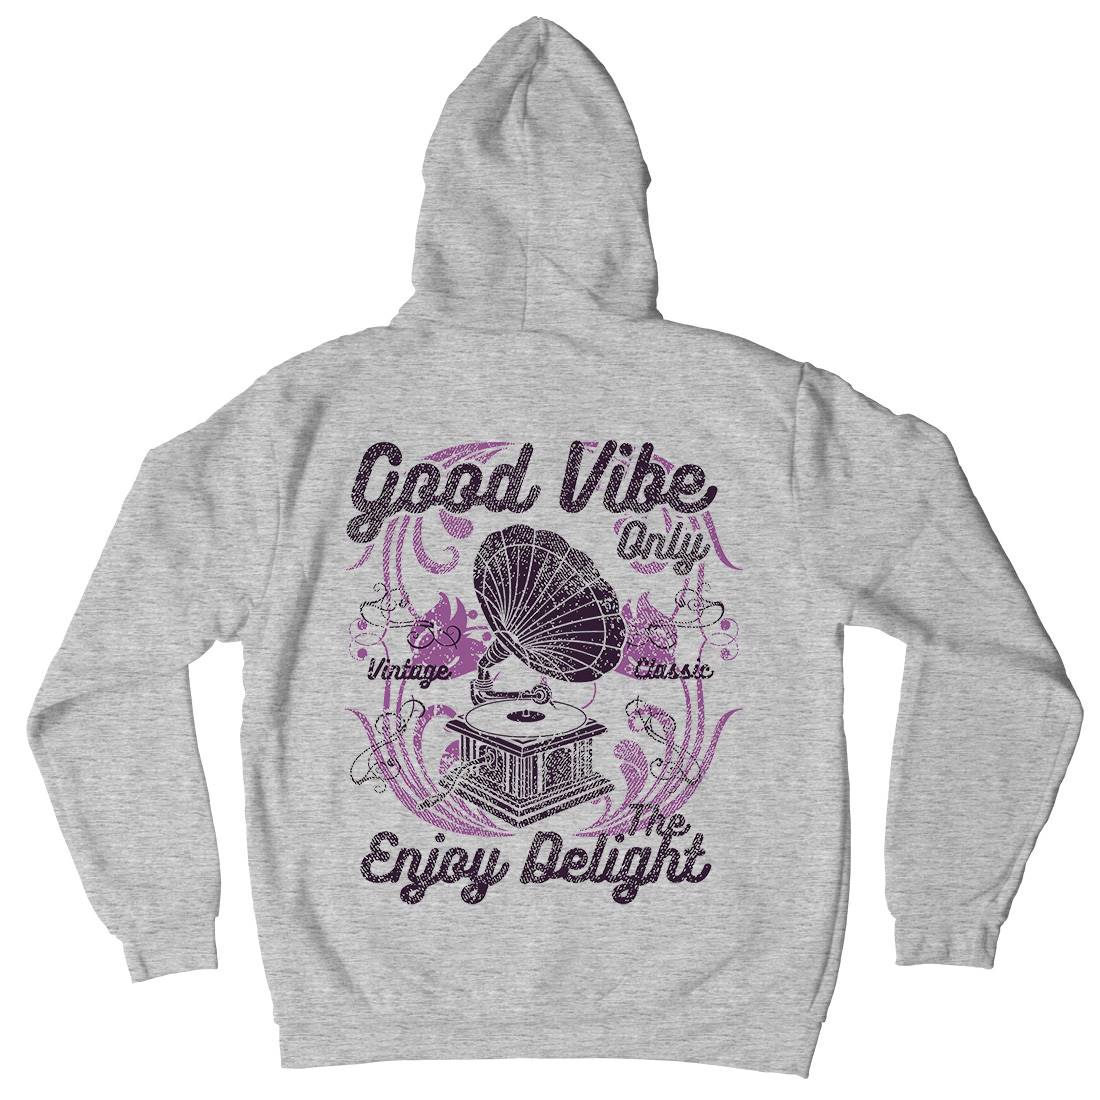 Good Vibe Only Mens Hoodie With Pocket Music A059